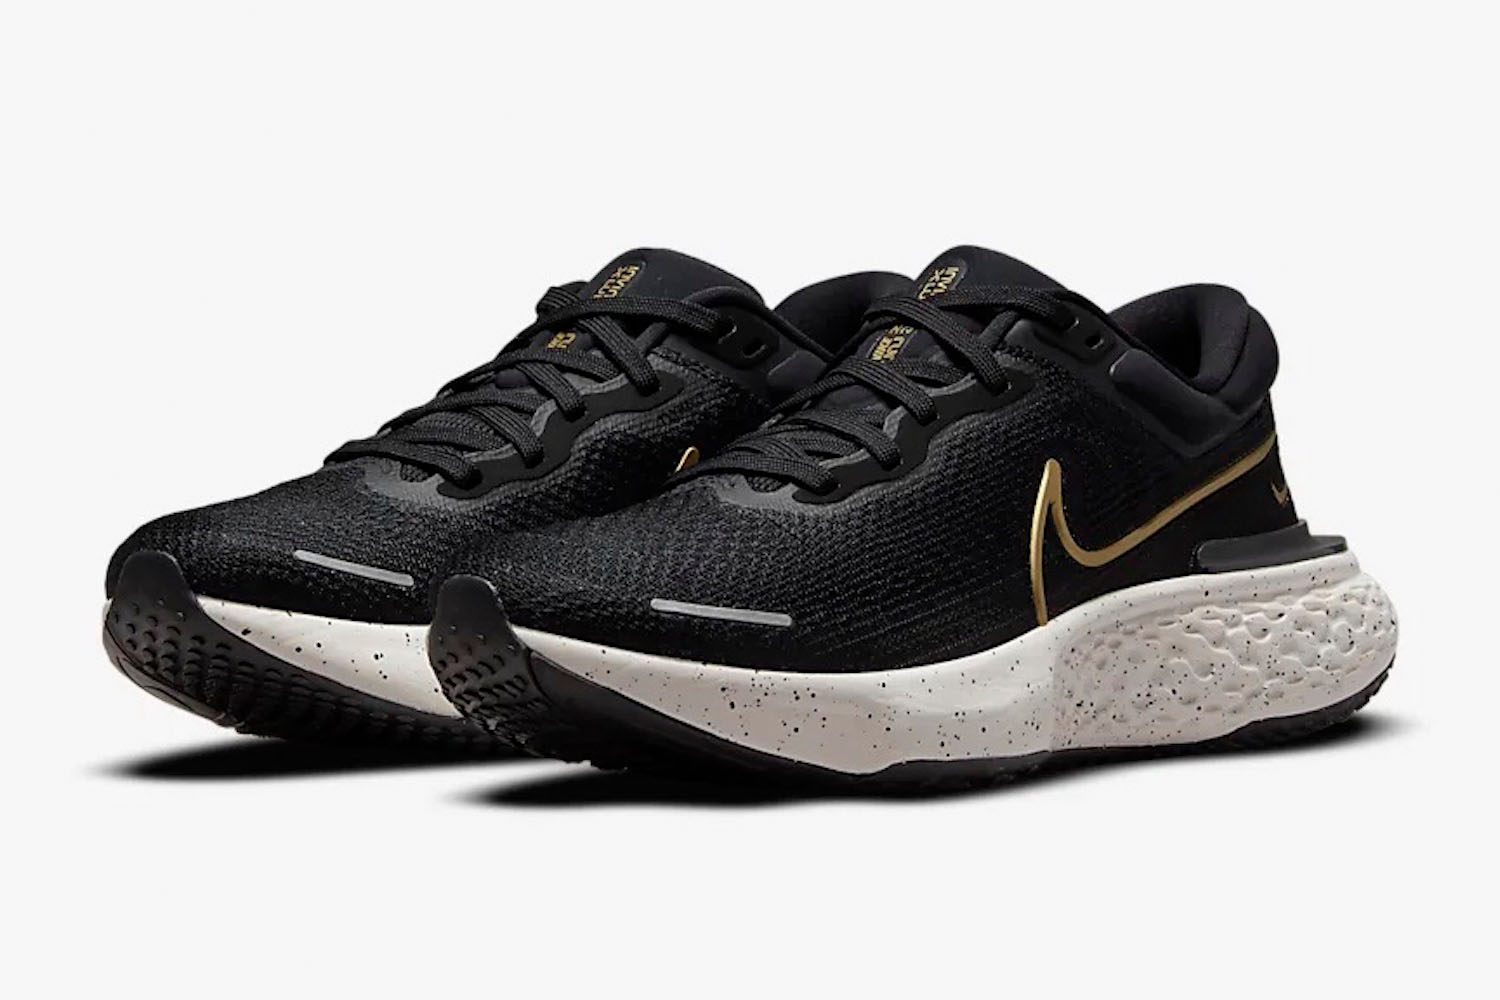 The Nike ZoomX running shoe in black on a white background